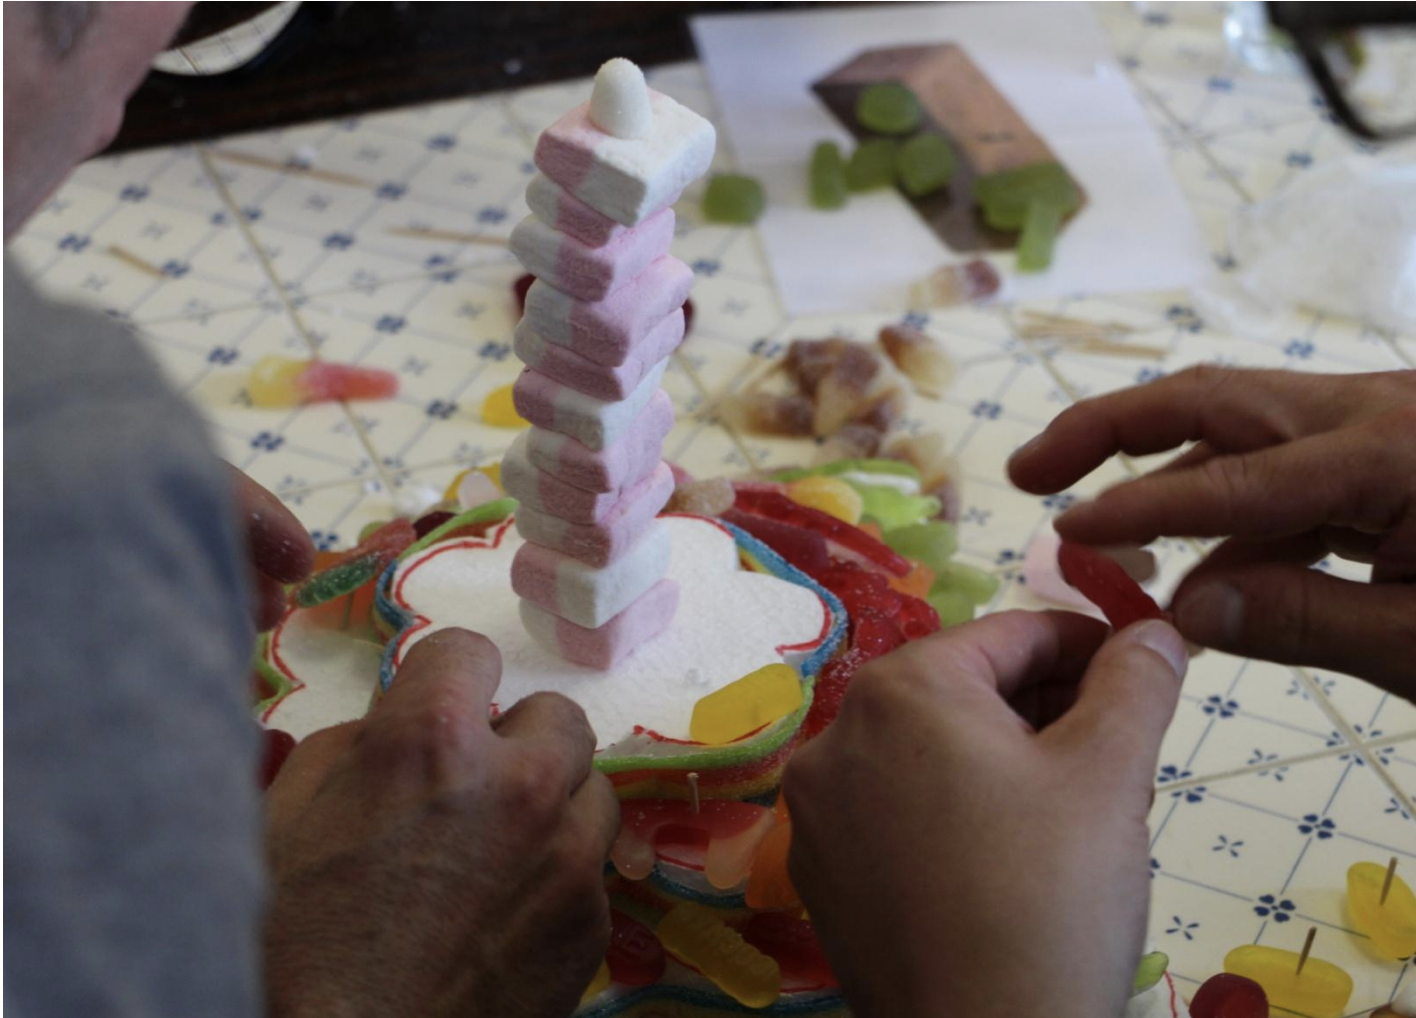 construction of a candy cake during the Jengame